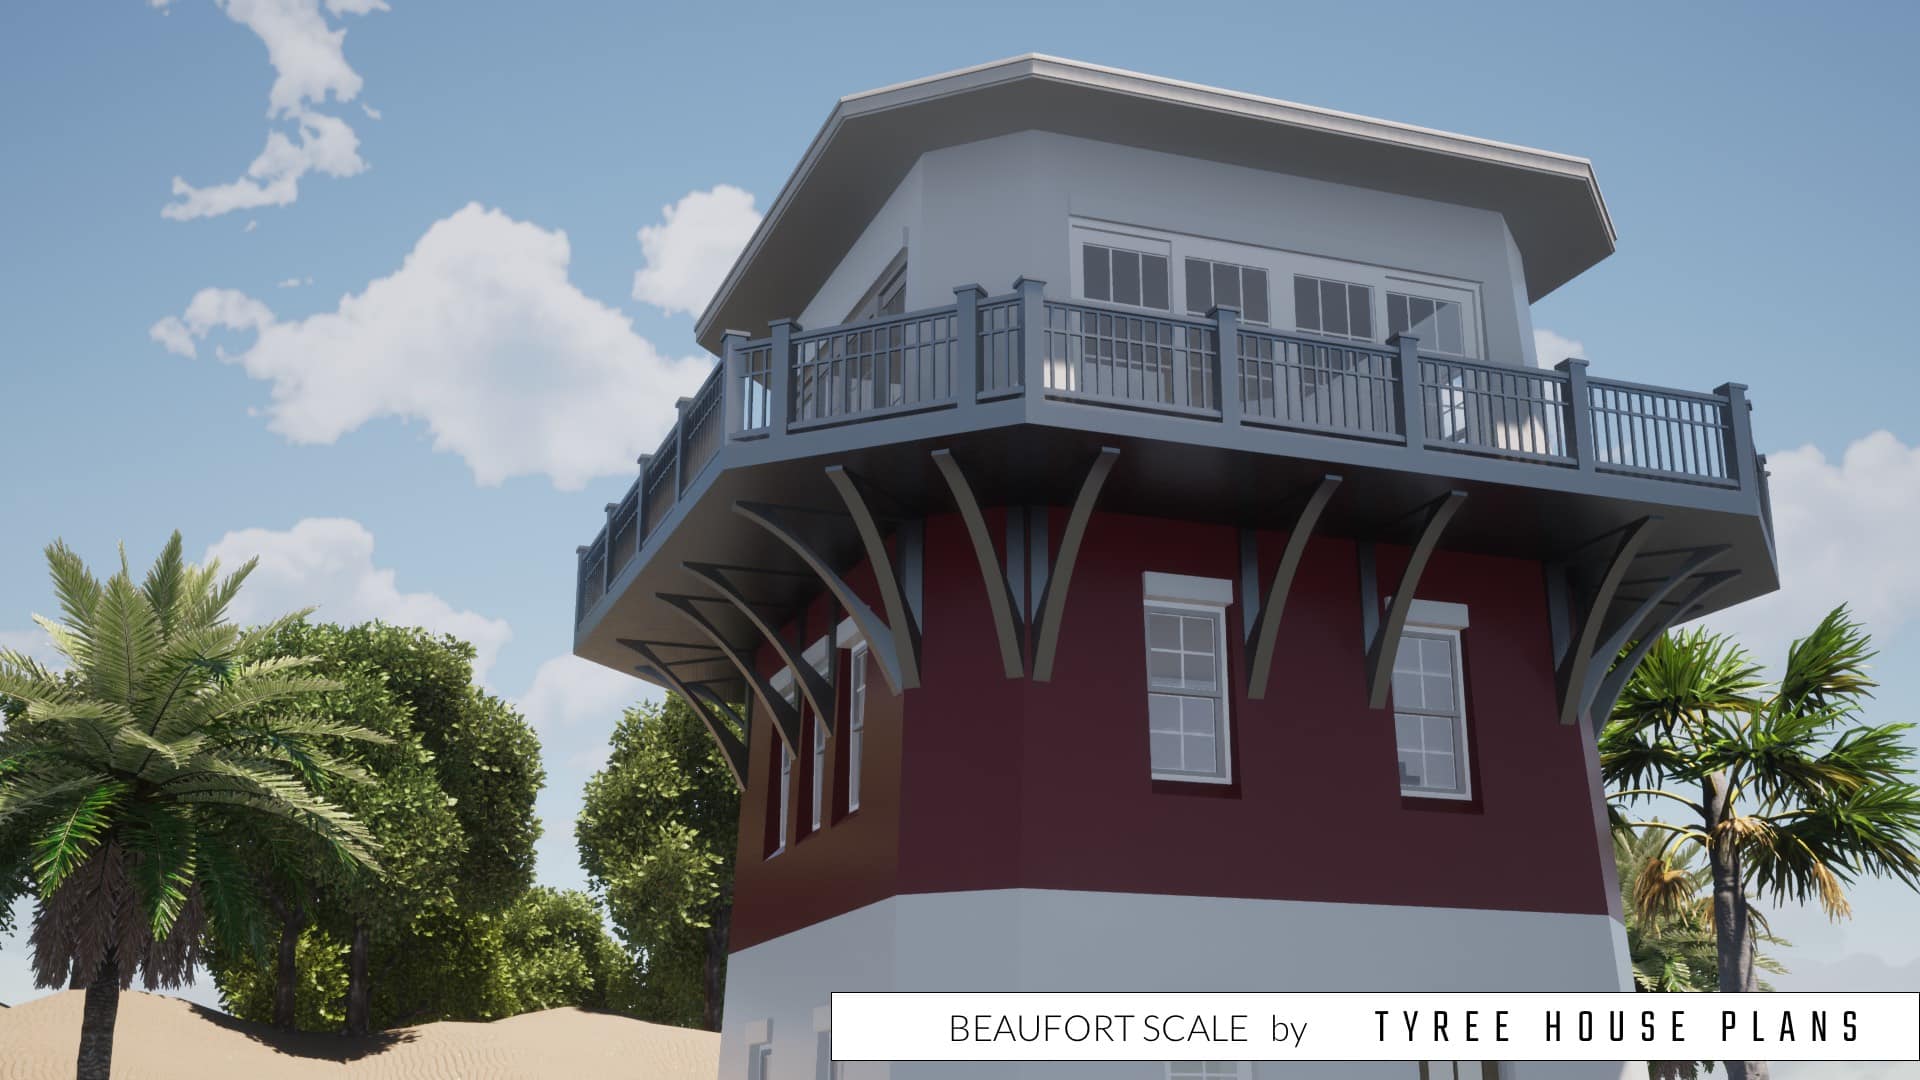 Up close view of the balcony. Beaufort Scale by Tyree House Plans.